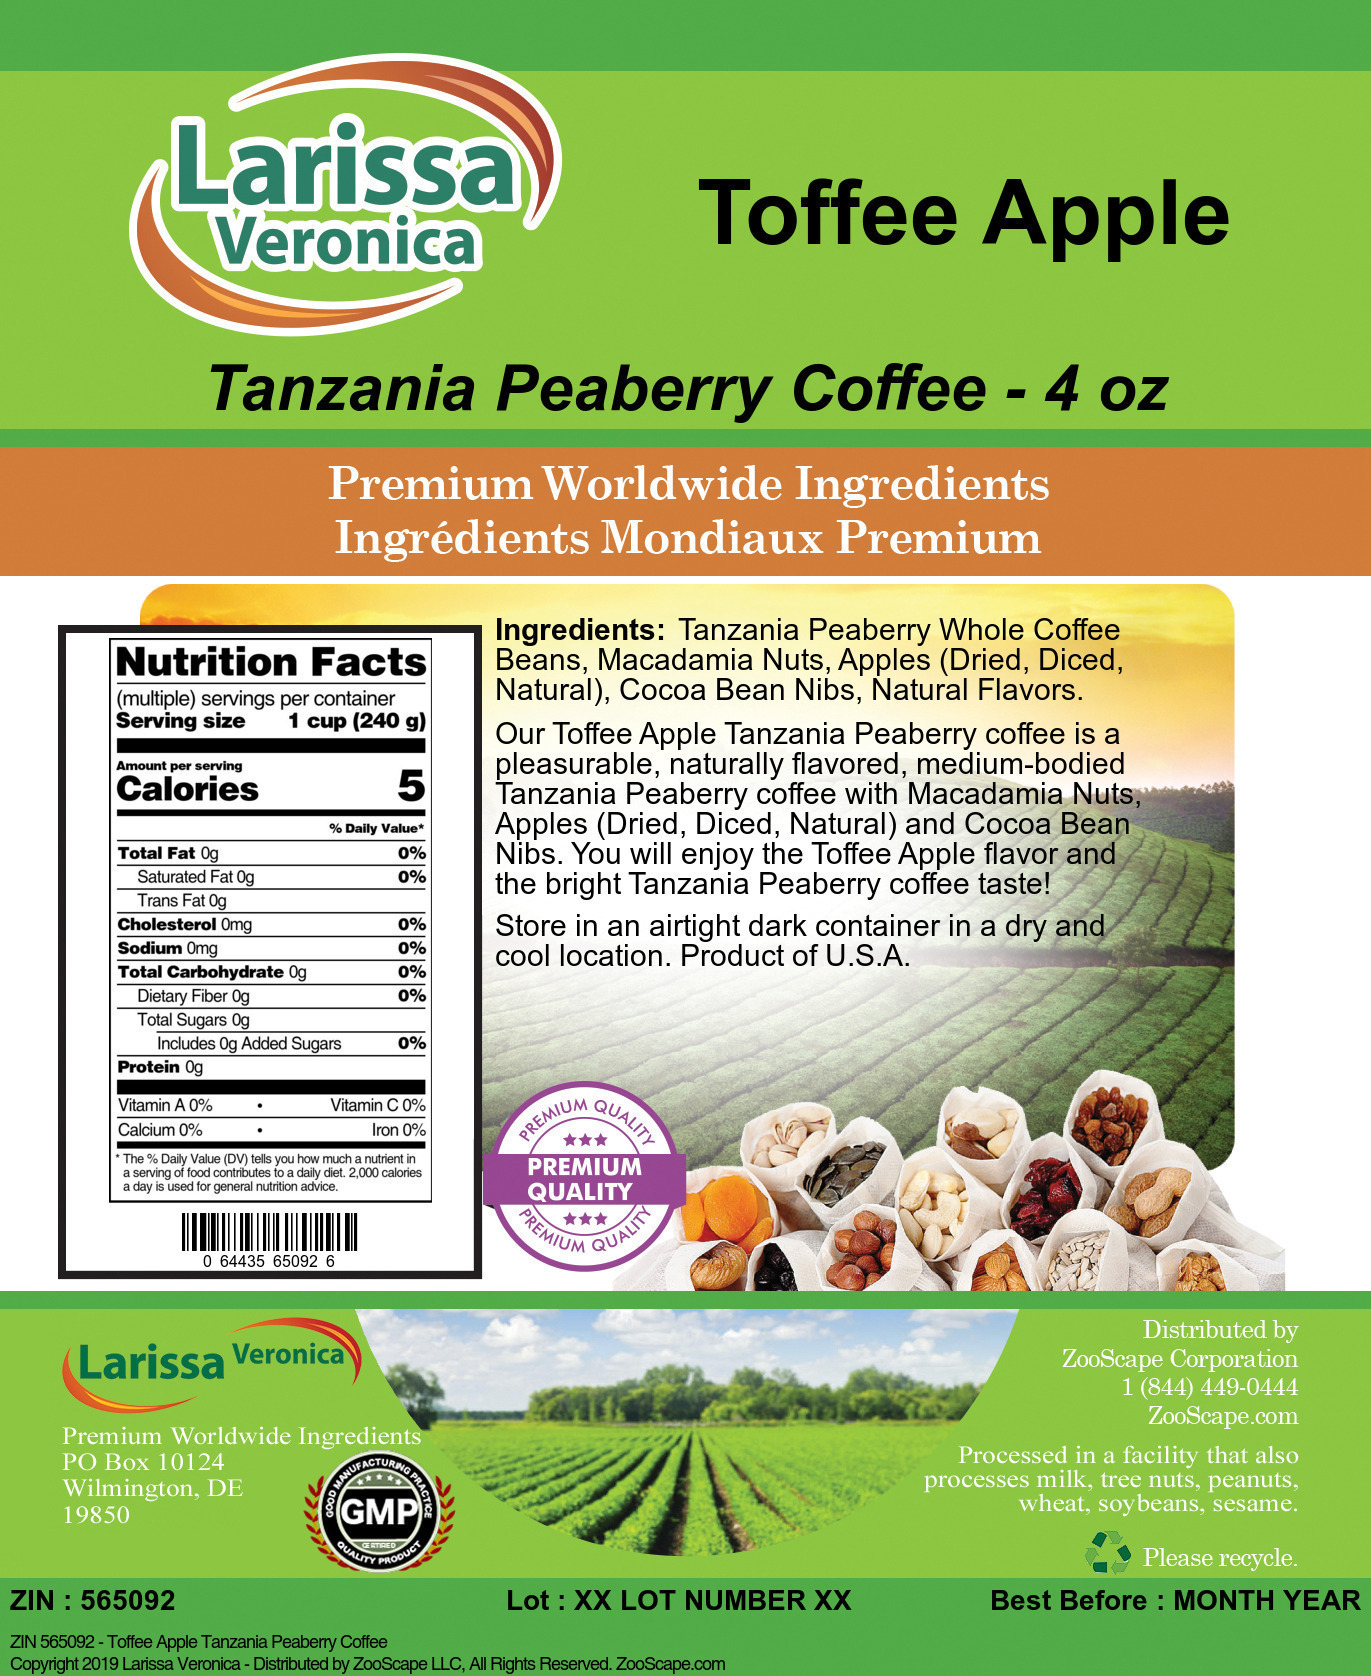 Toffee Apple Tanzania Peaberry Coffee - Label